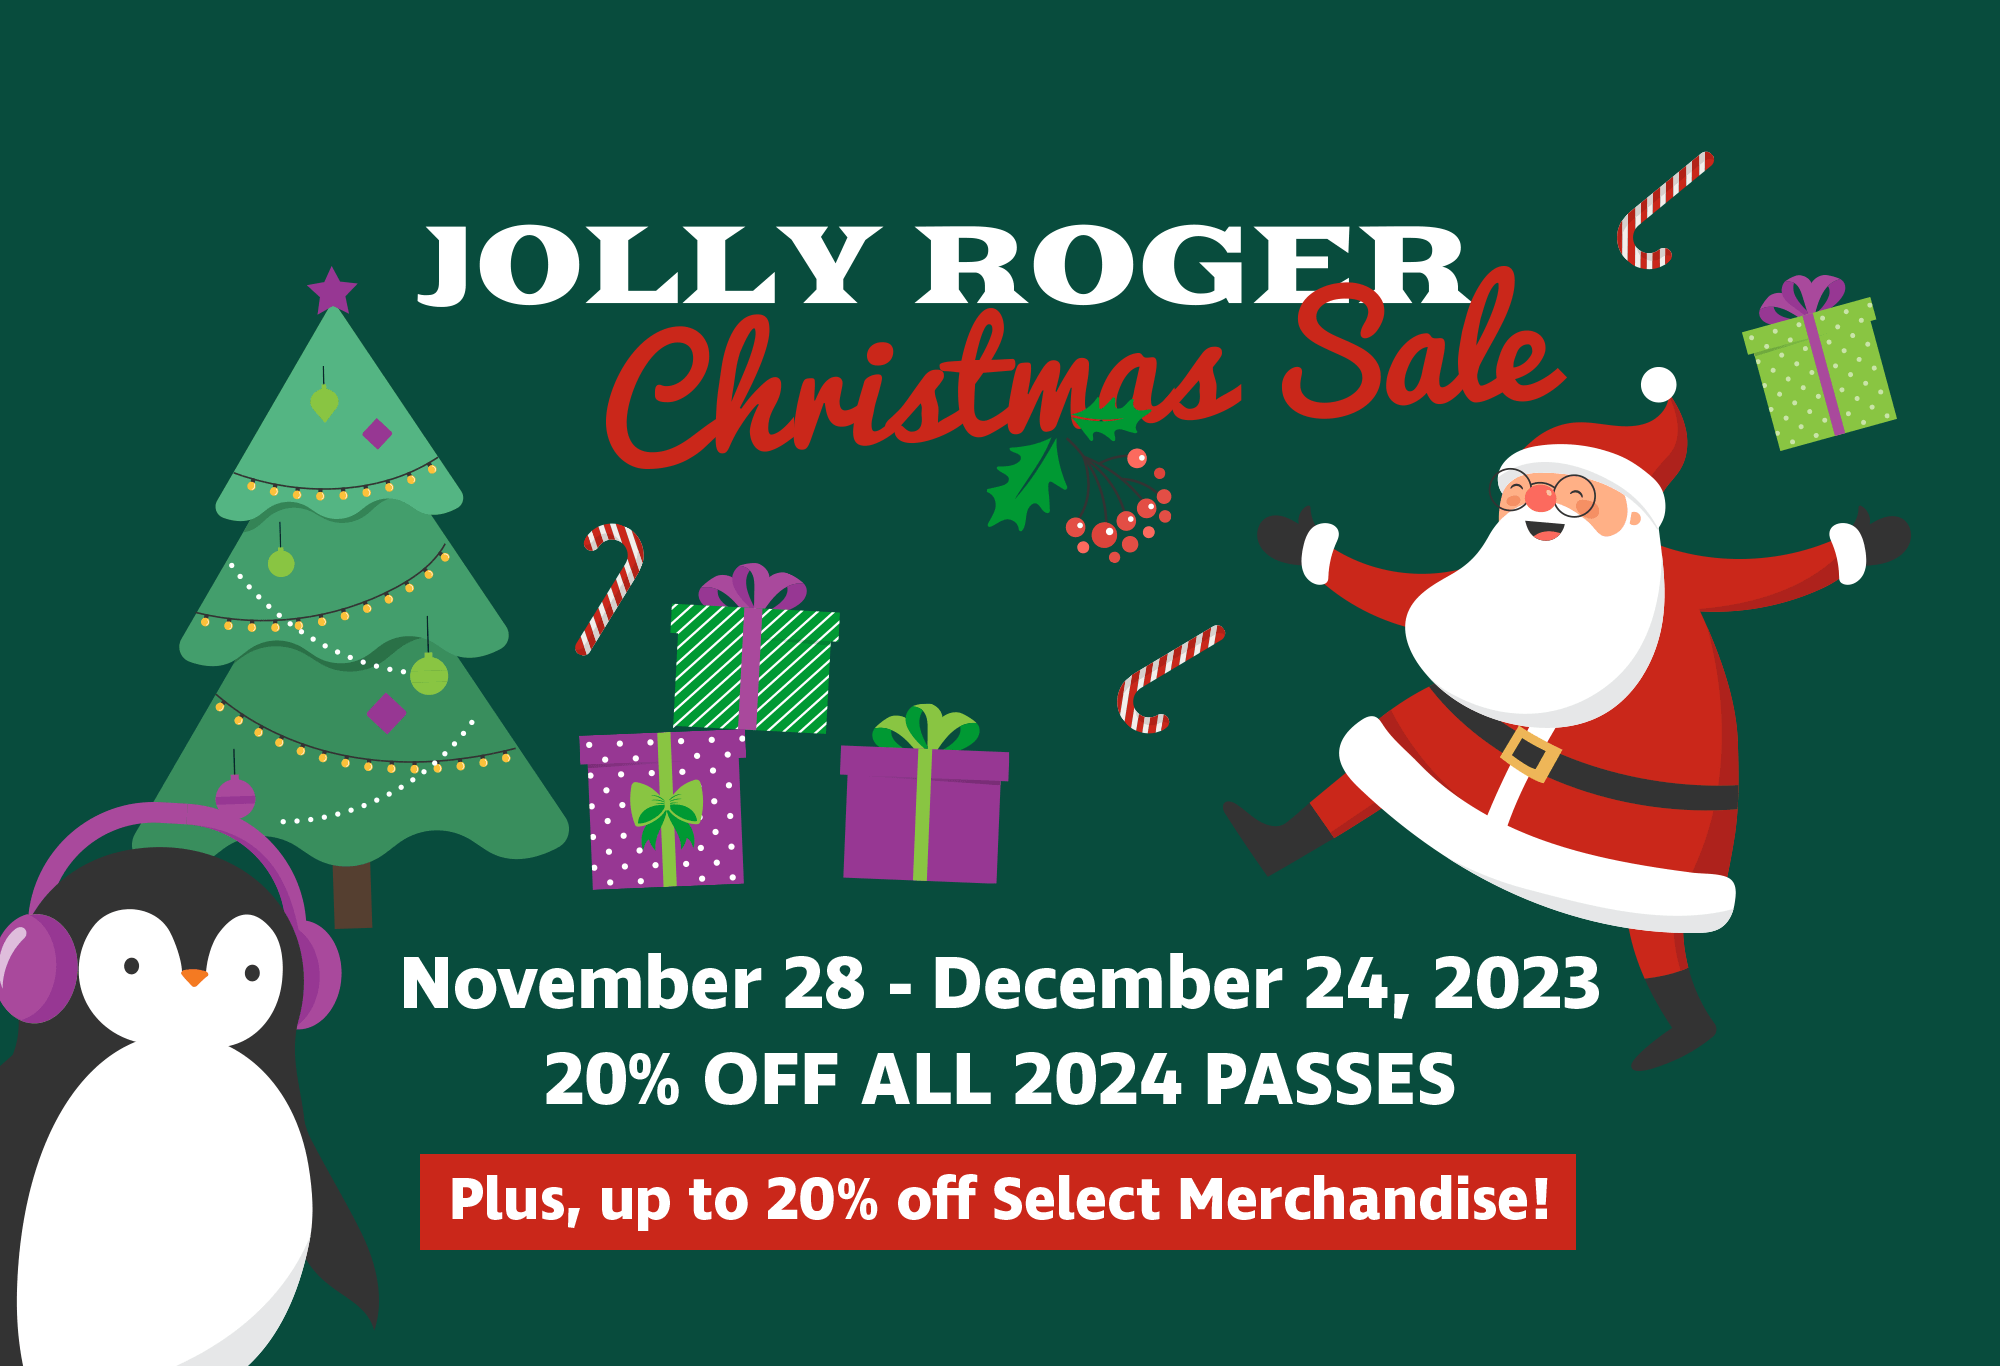 Jolly Roger Christmas Sale November 28 - December 24, 2023 20% Off all 2024 Passes - Plus up to 20% off Select Merchandise!